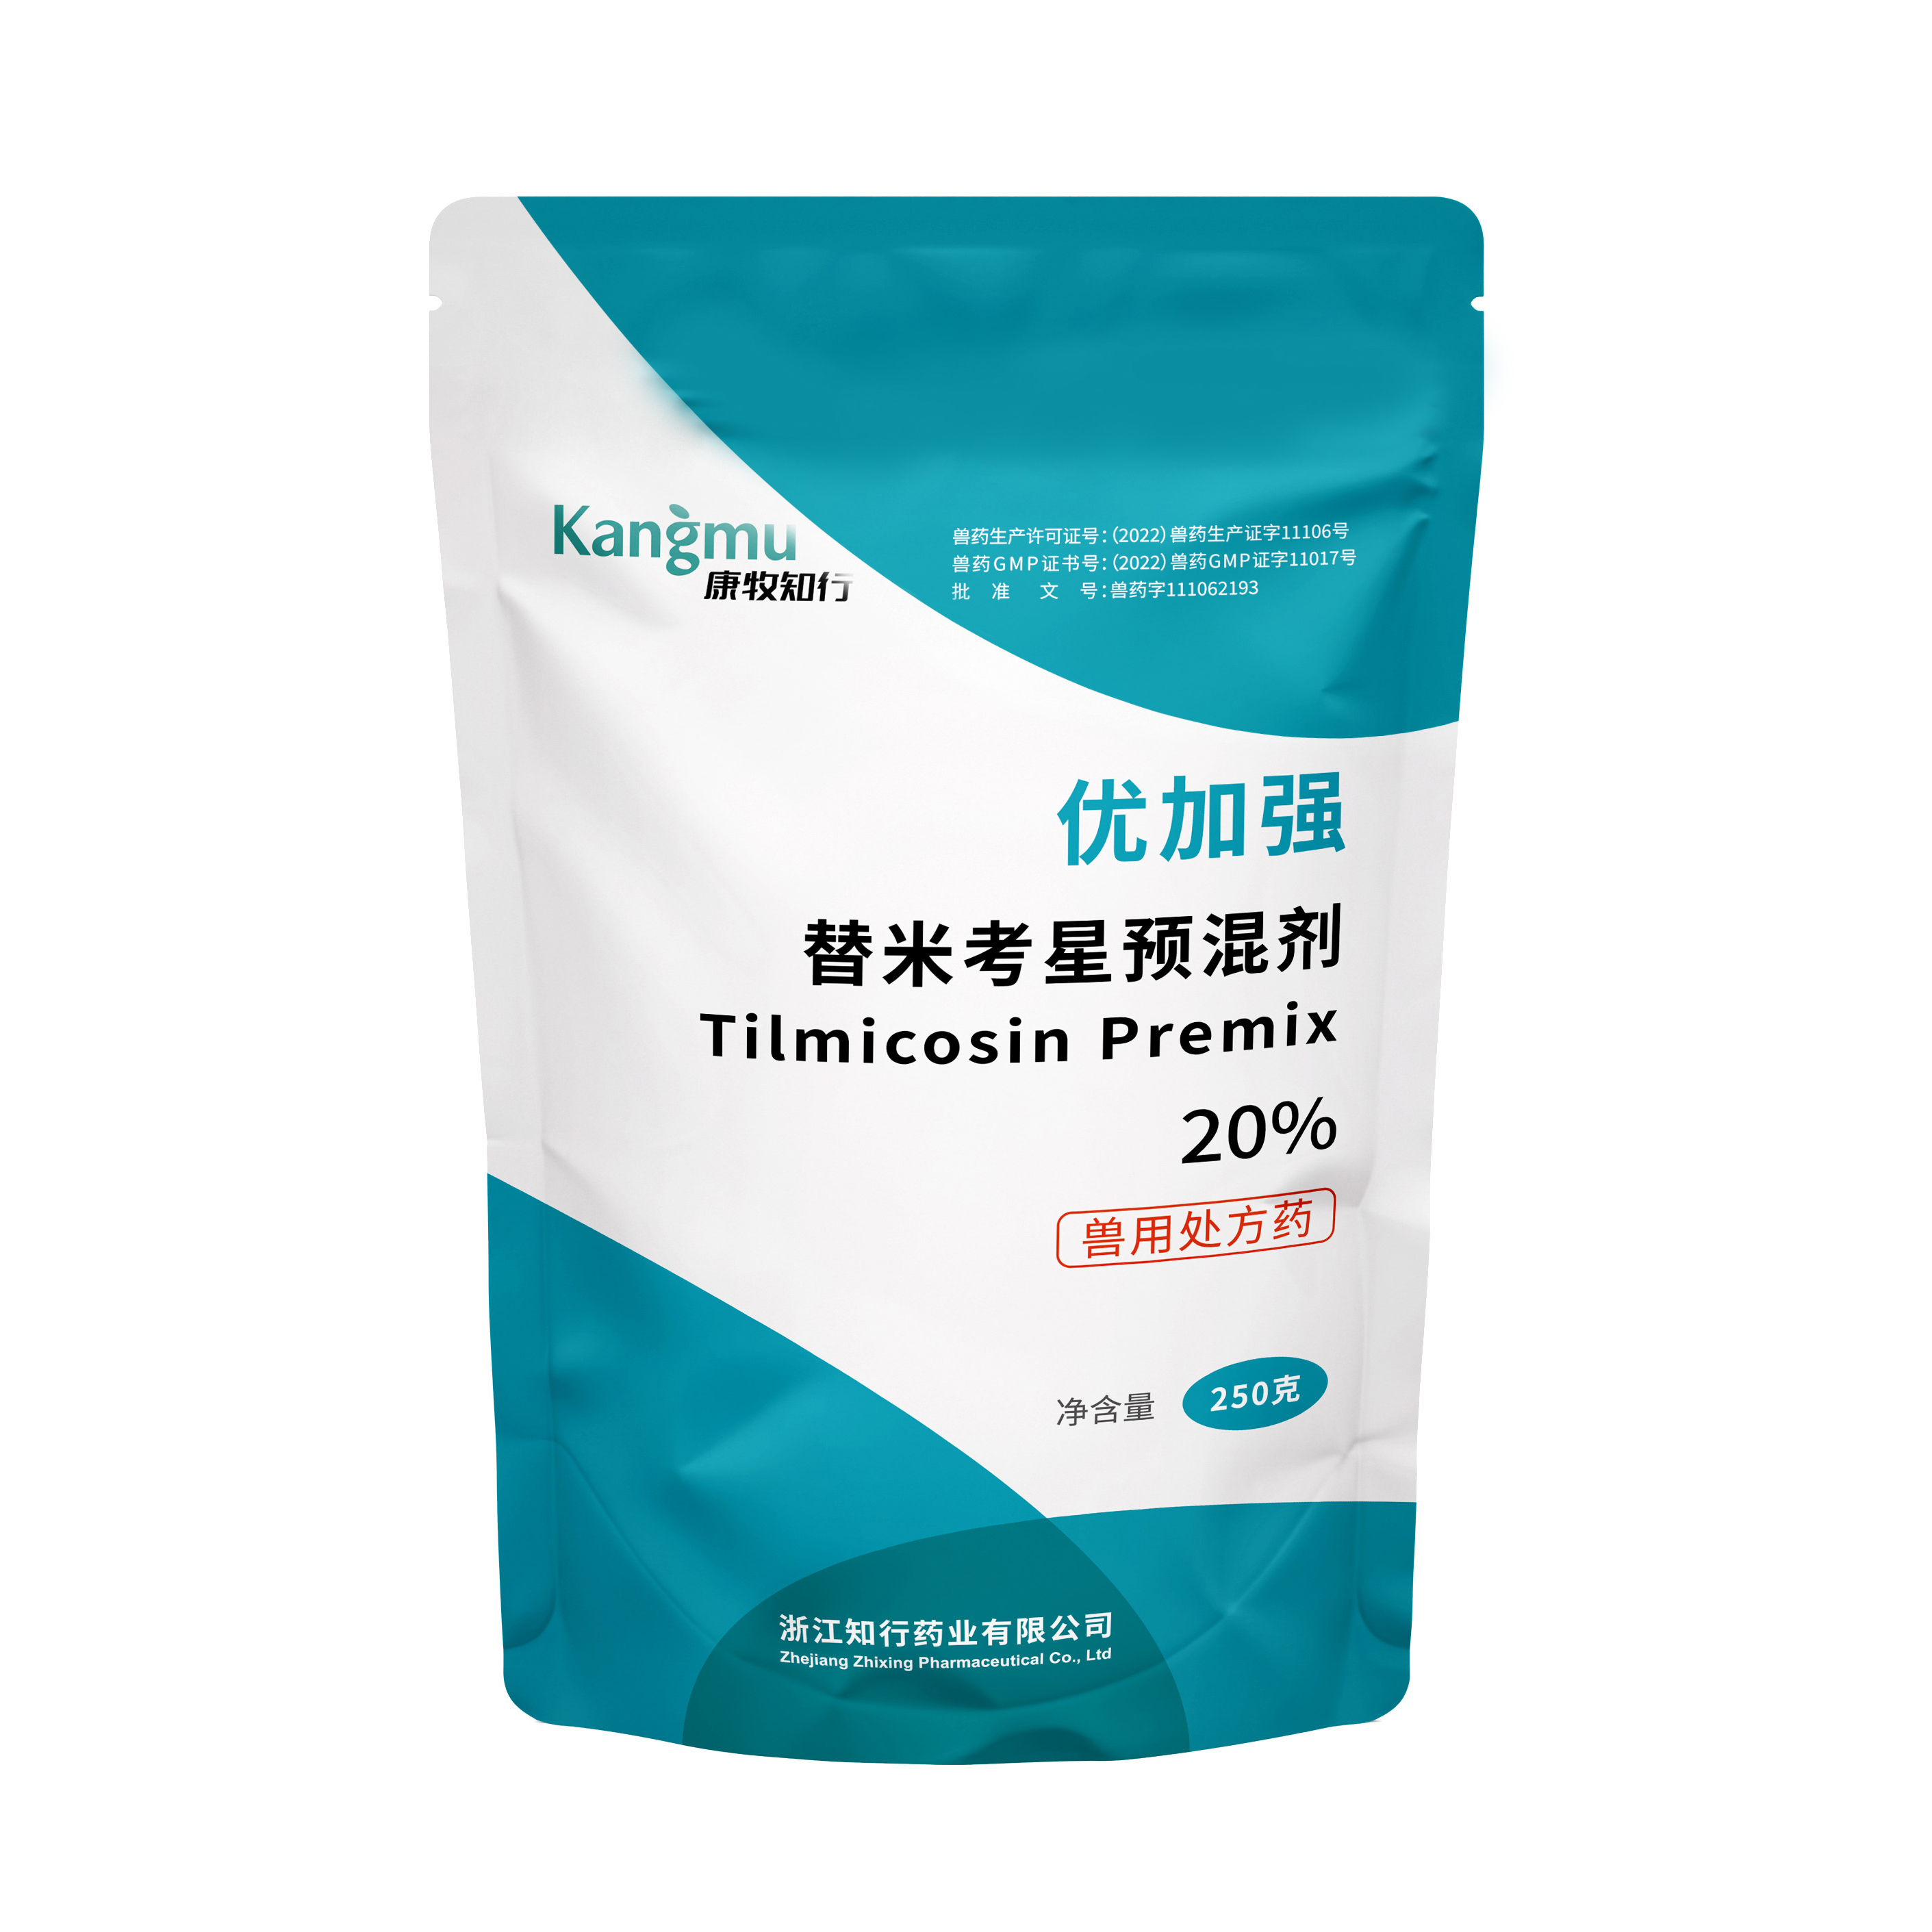 Water solubility of 20% tilmicosin premix